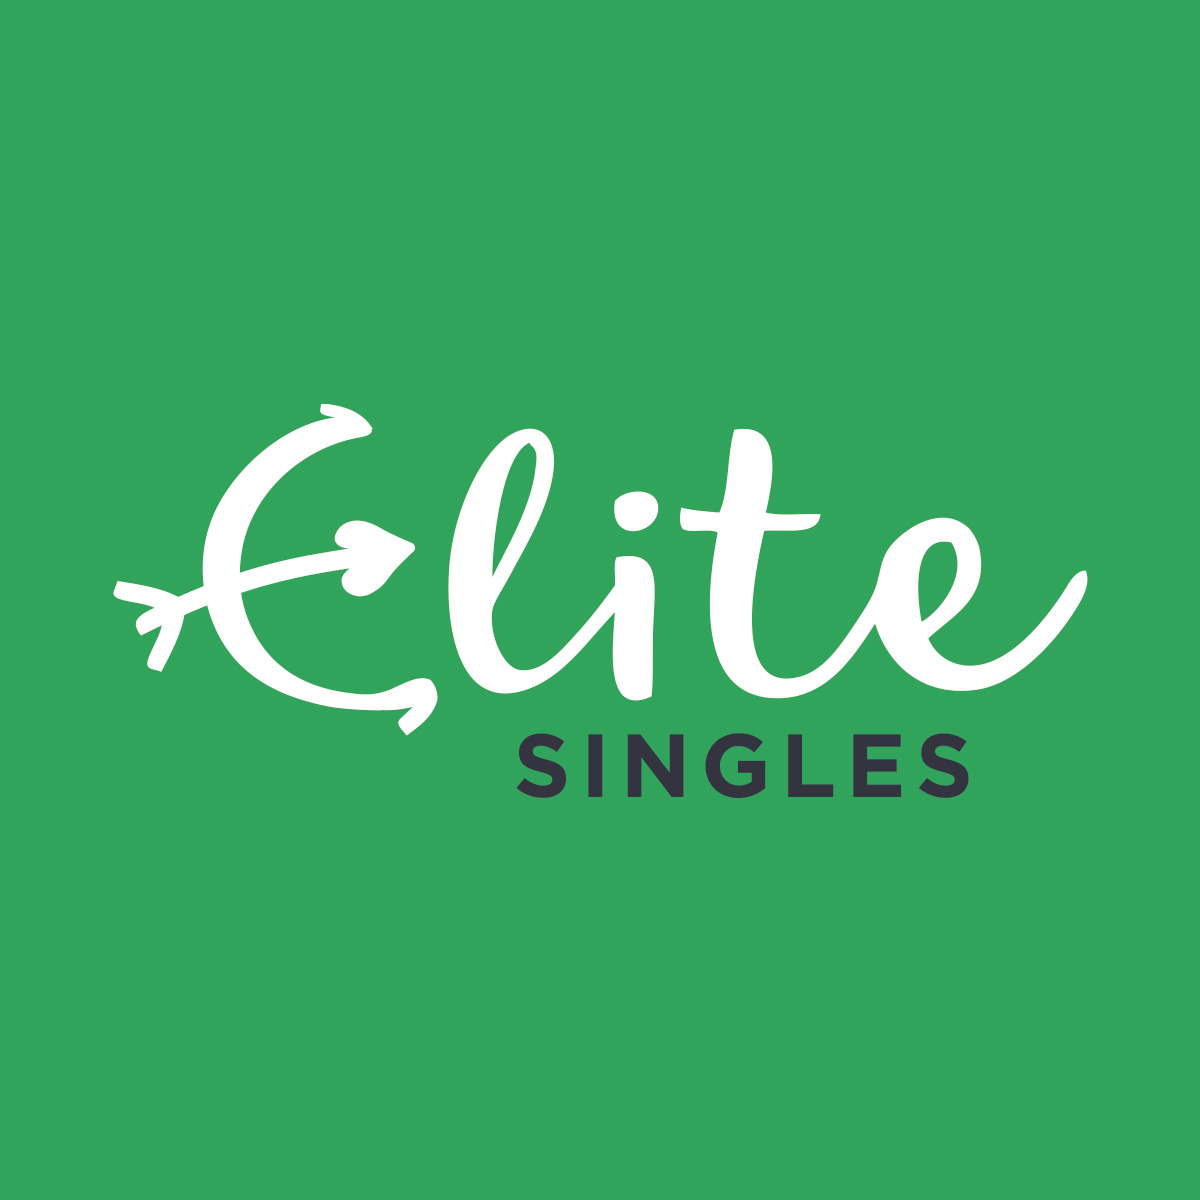 Elity Dating Sites.